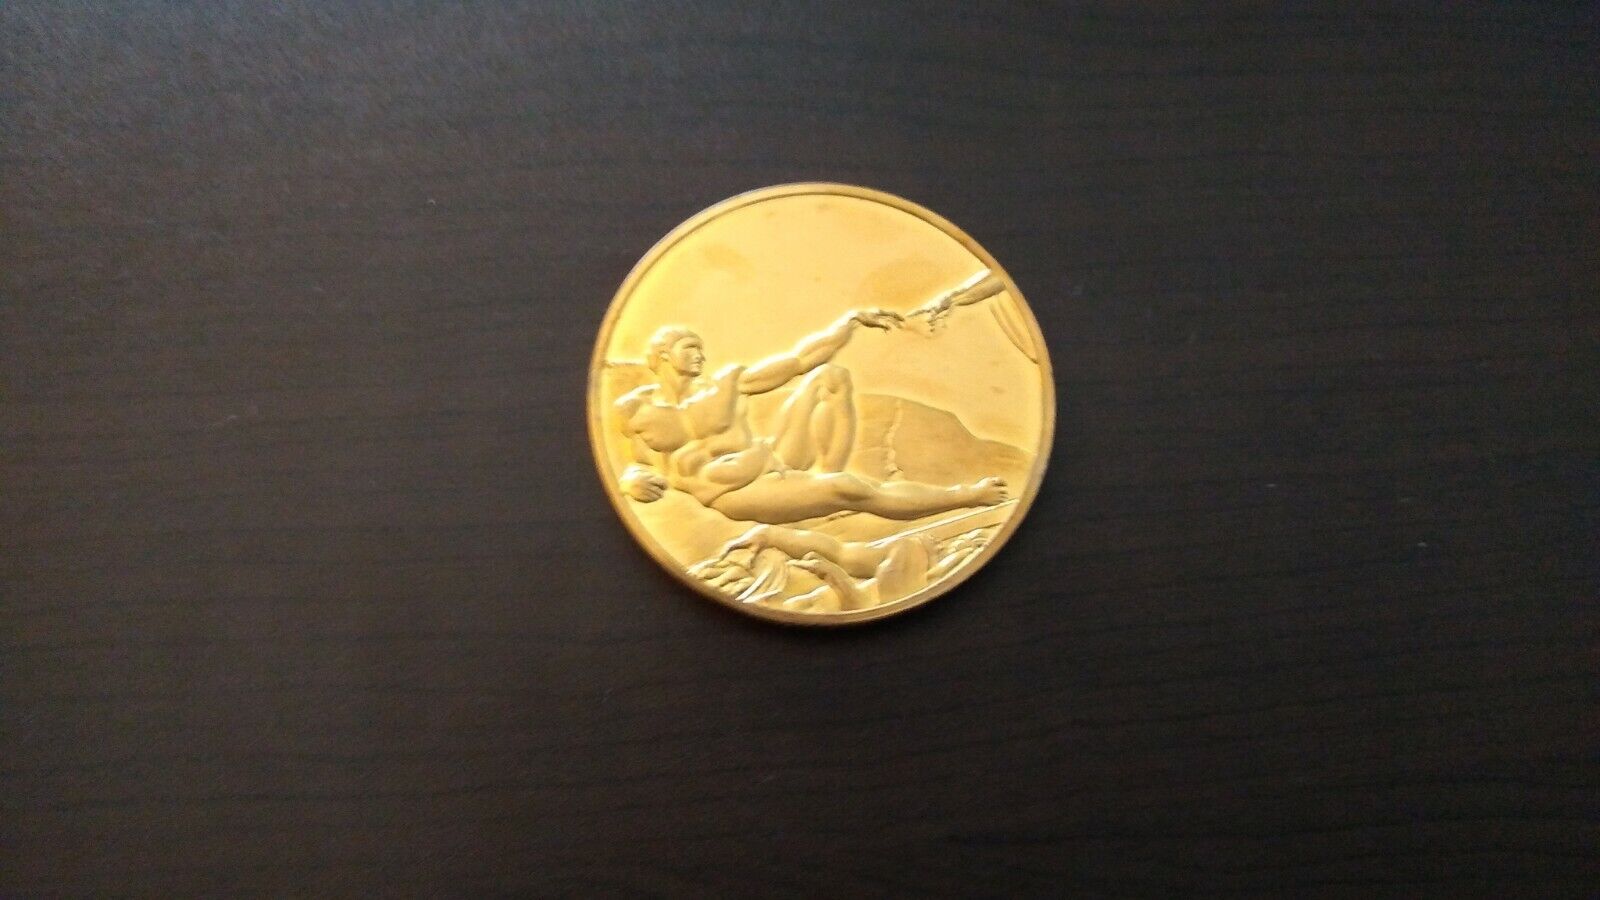 The Creation of Adam 24K Electroplate Gold 2.35 oz Sterling Silver Medal